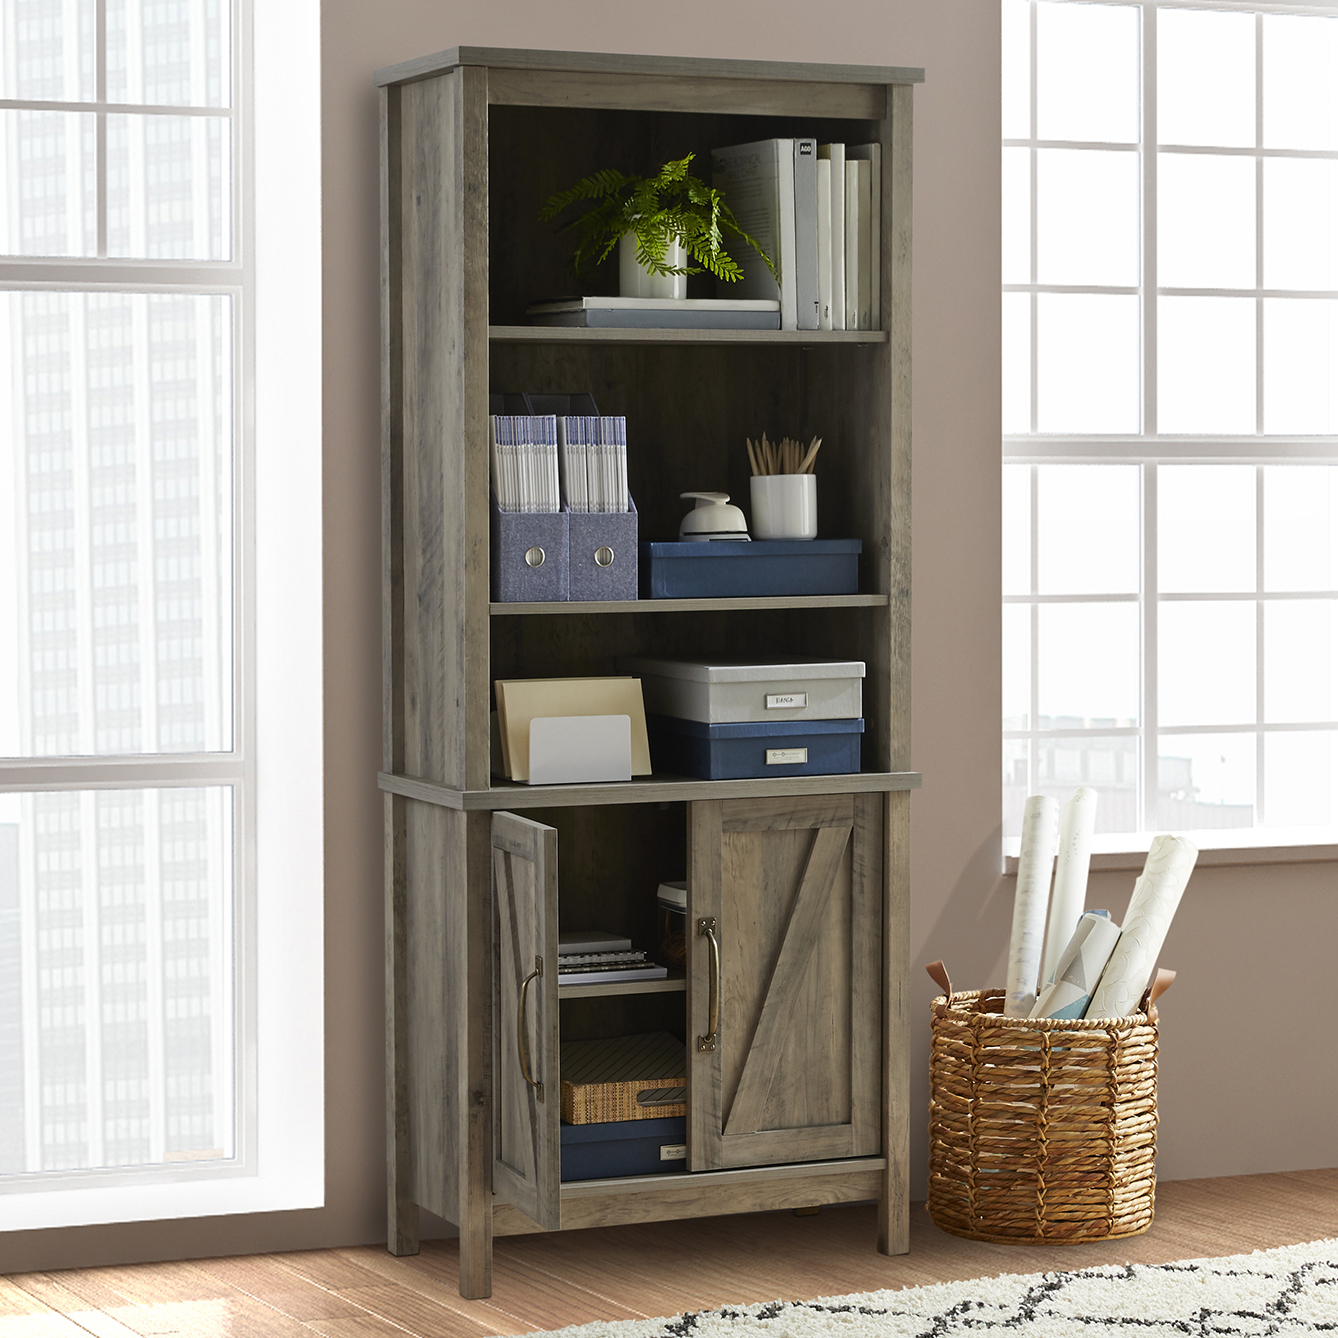 Better Homes & Gardens Modern Farmhouse 5 Shelf Library Bookcase with Doors, Rustic Gray Finish - image 5 of 16